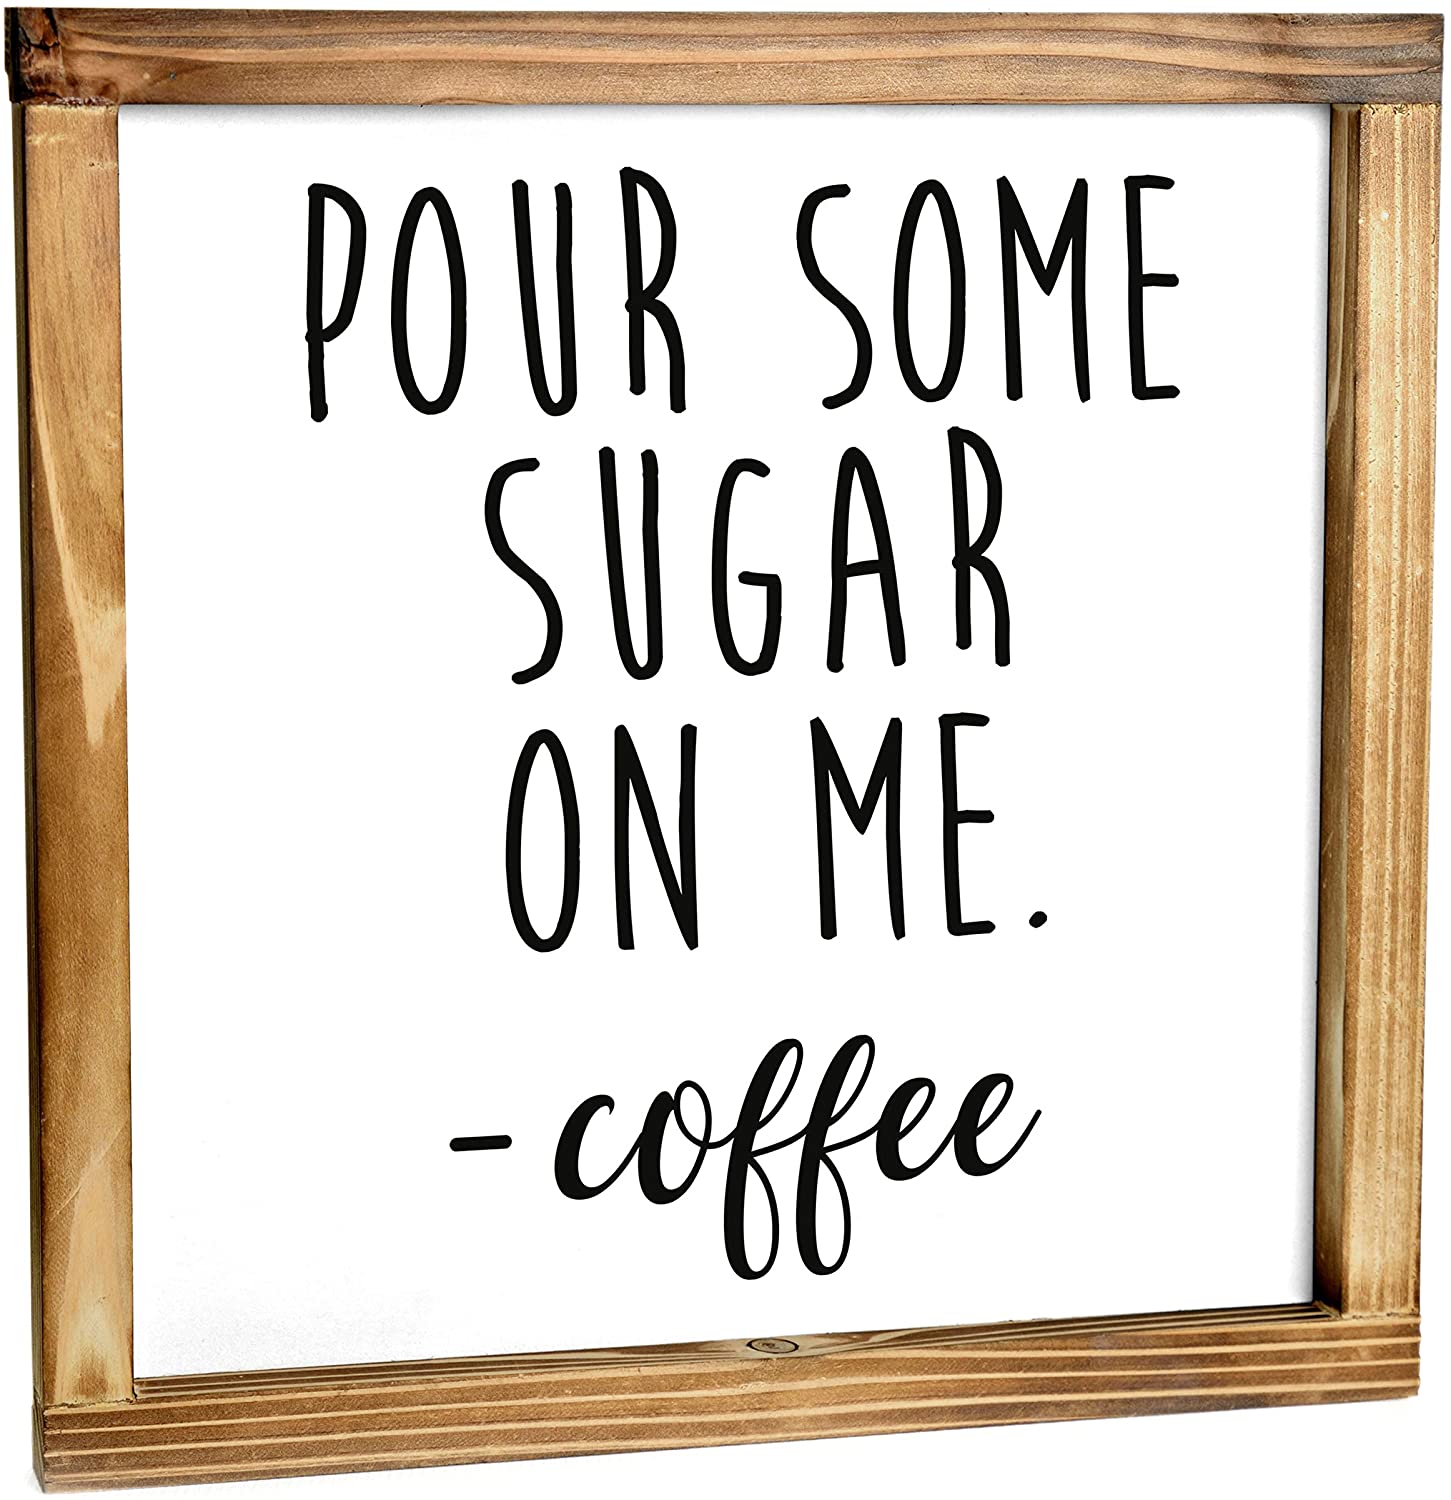 Pour Some Sugar on Me - Coffee Sign - Funny Kitchen Sign - Modern Farmhouse Kitchen Decor, Kitchen Wall Decor, Rustic Home Decor, Coffee Bar Decor with Solid Wood Frame 12x12 Inch